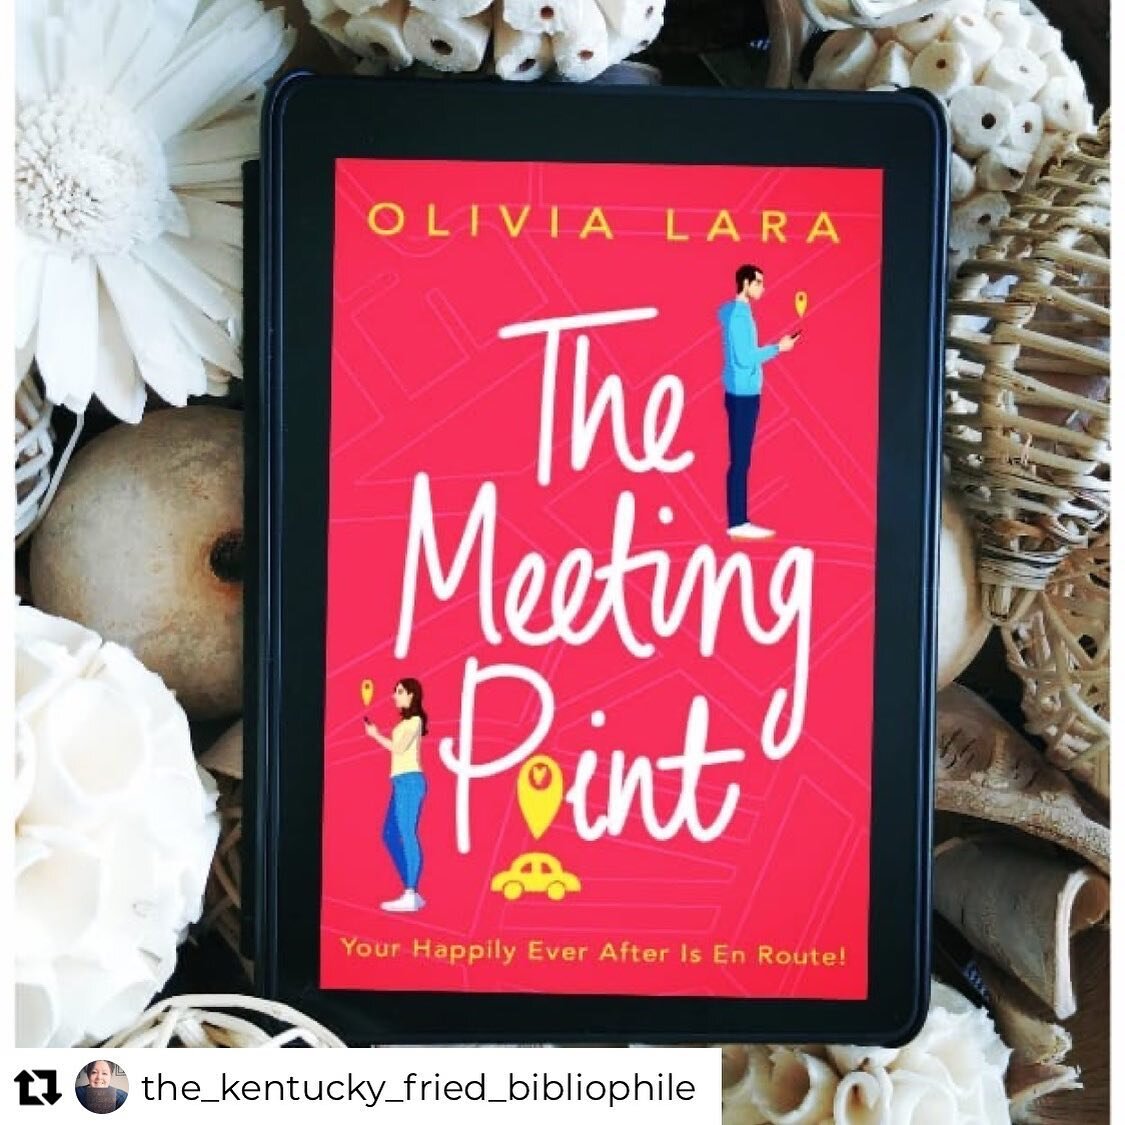 Repost from @the_kentucky_fried_bibliophile
&bull;
What if the Lift driver who finds your cheating boyfriend's phone has all the direction to true love?

YA'LL!!!!! This was one of the most unique written plots I have ever experienced in my life! The